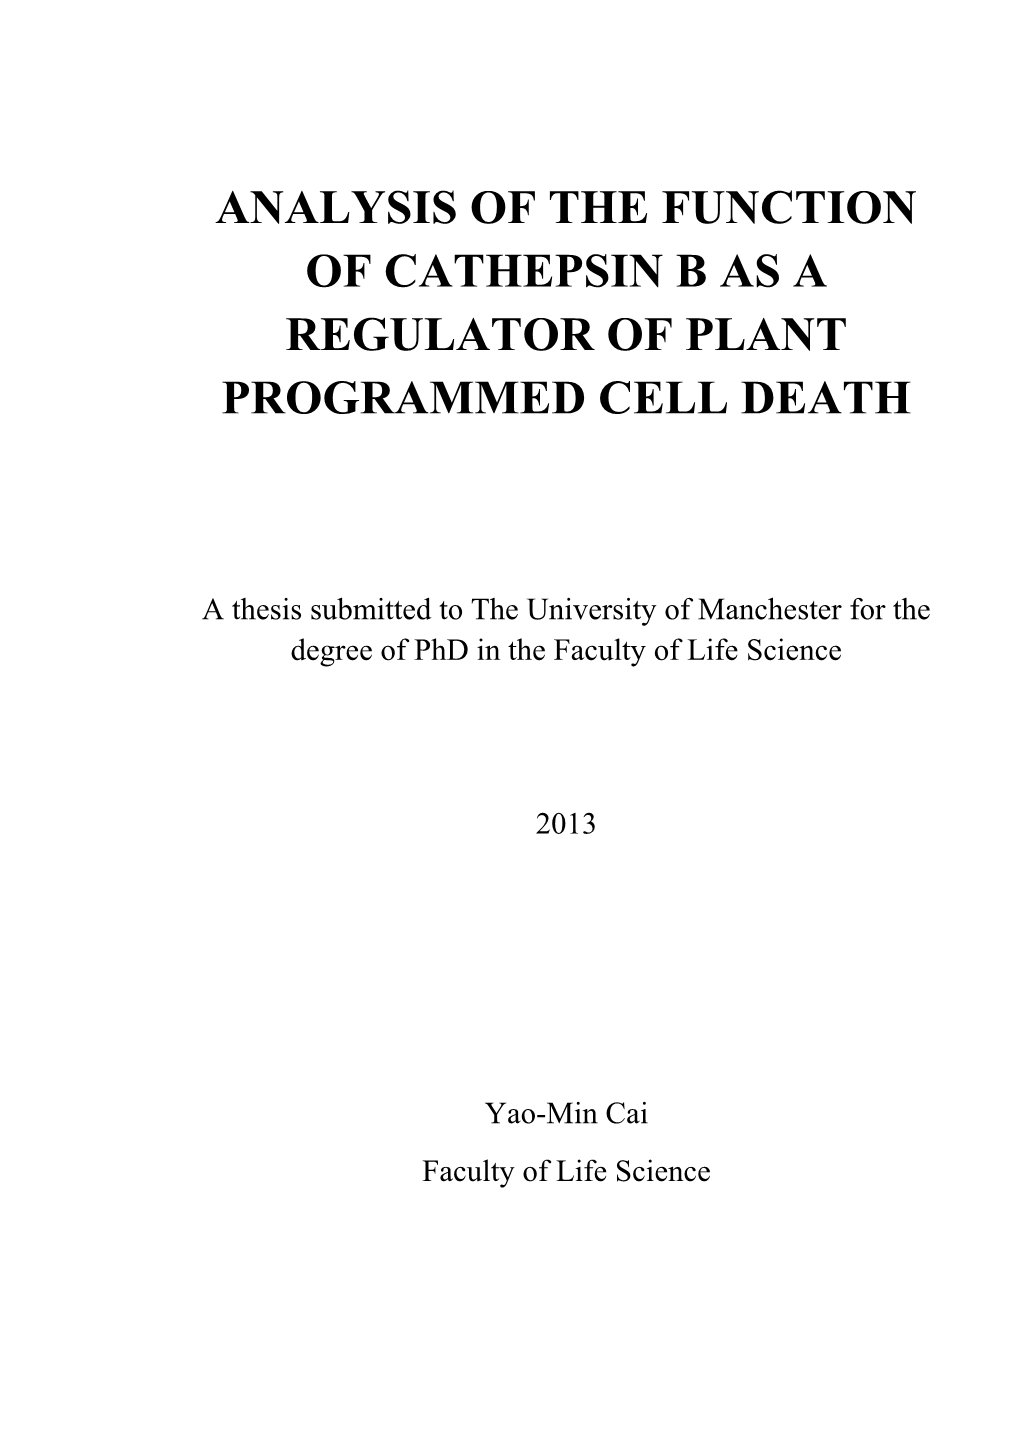 Analysis of the Function of Cathepsin B As a Regulator of Plant Programmed Cell Death